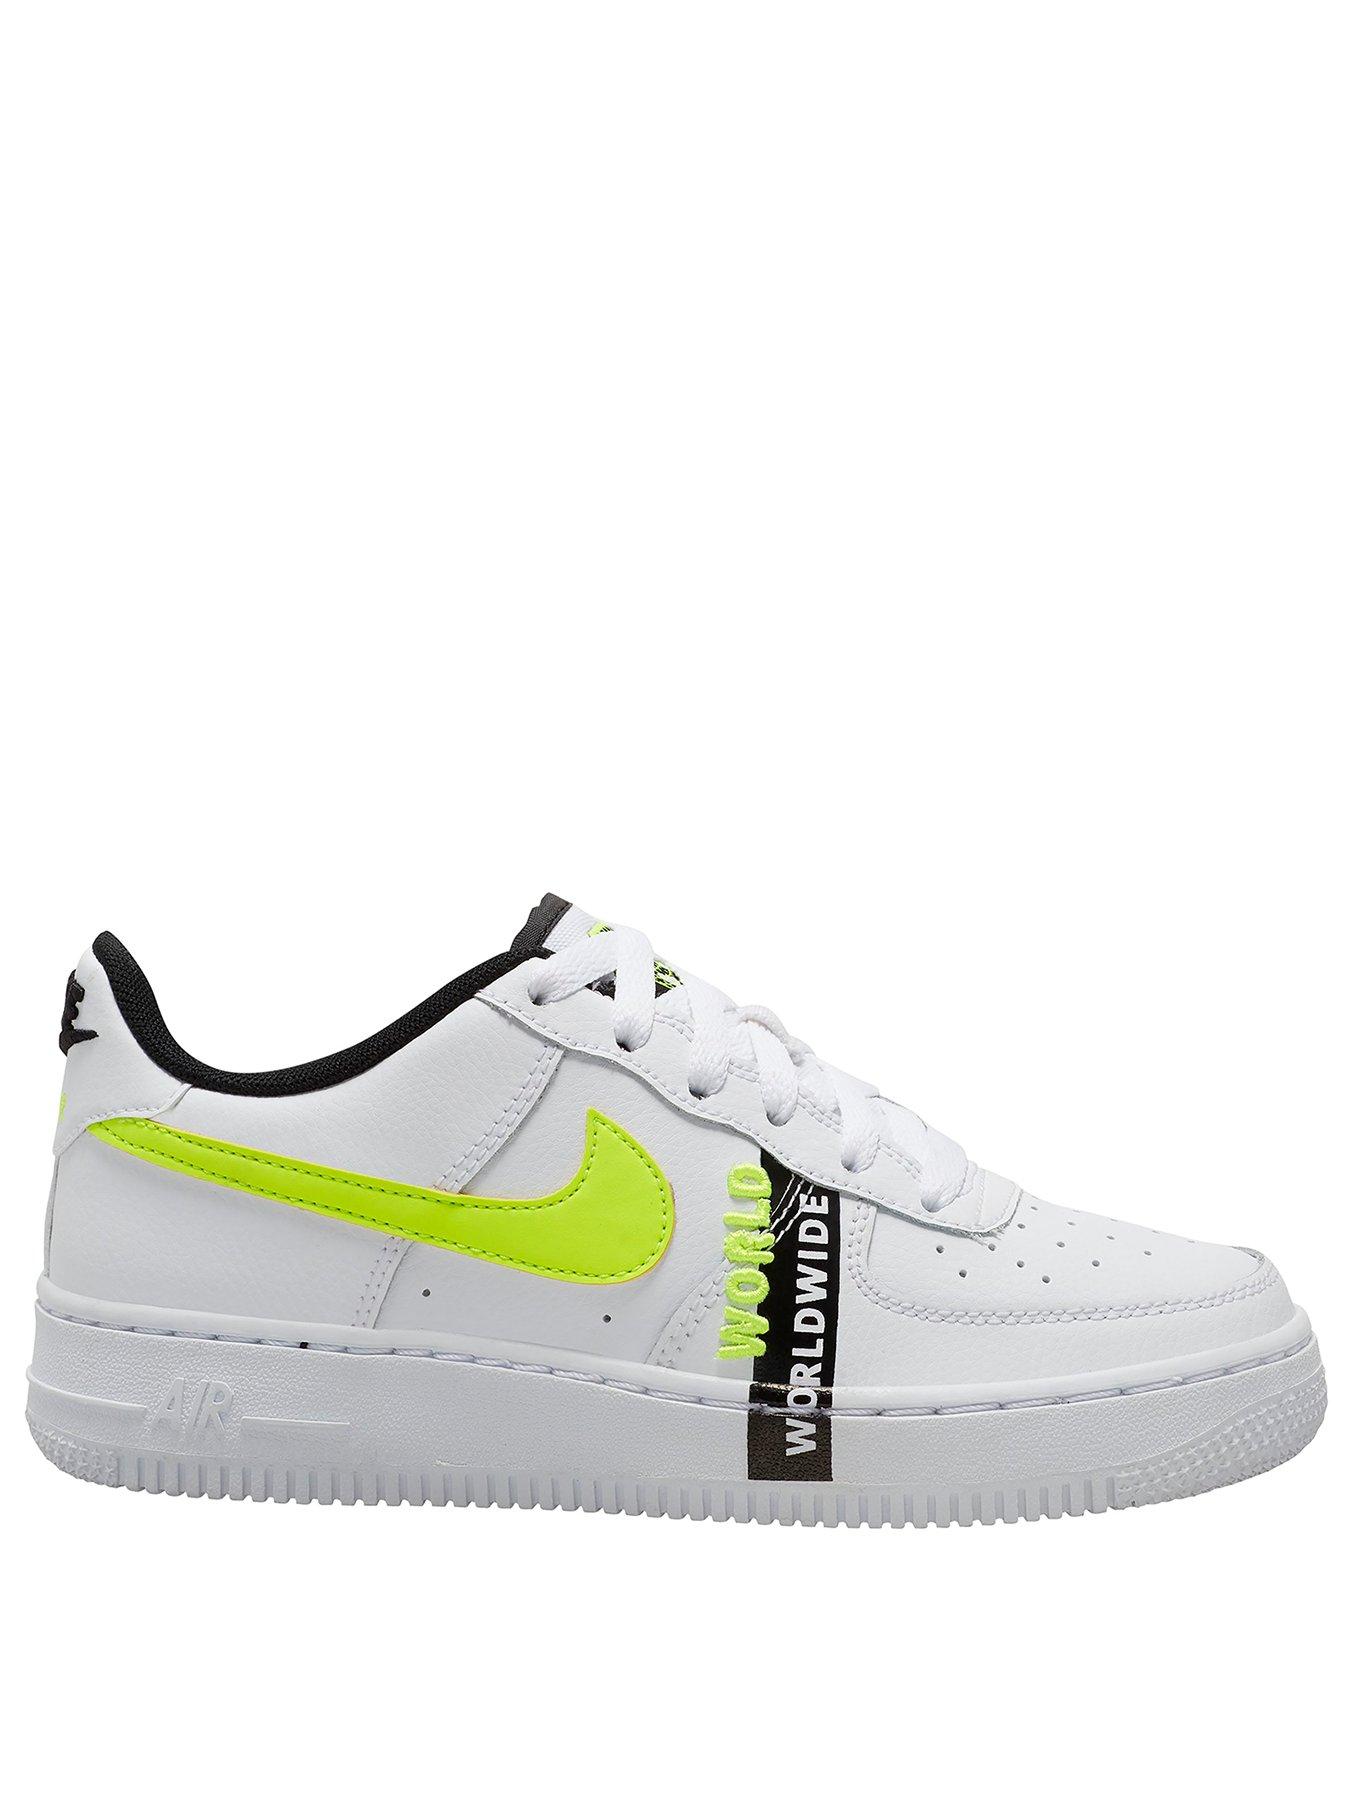 air force 1 size 5.5 junior